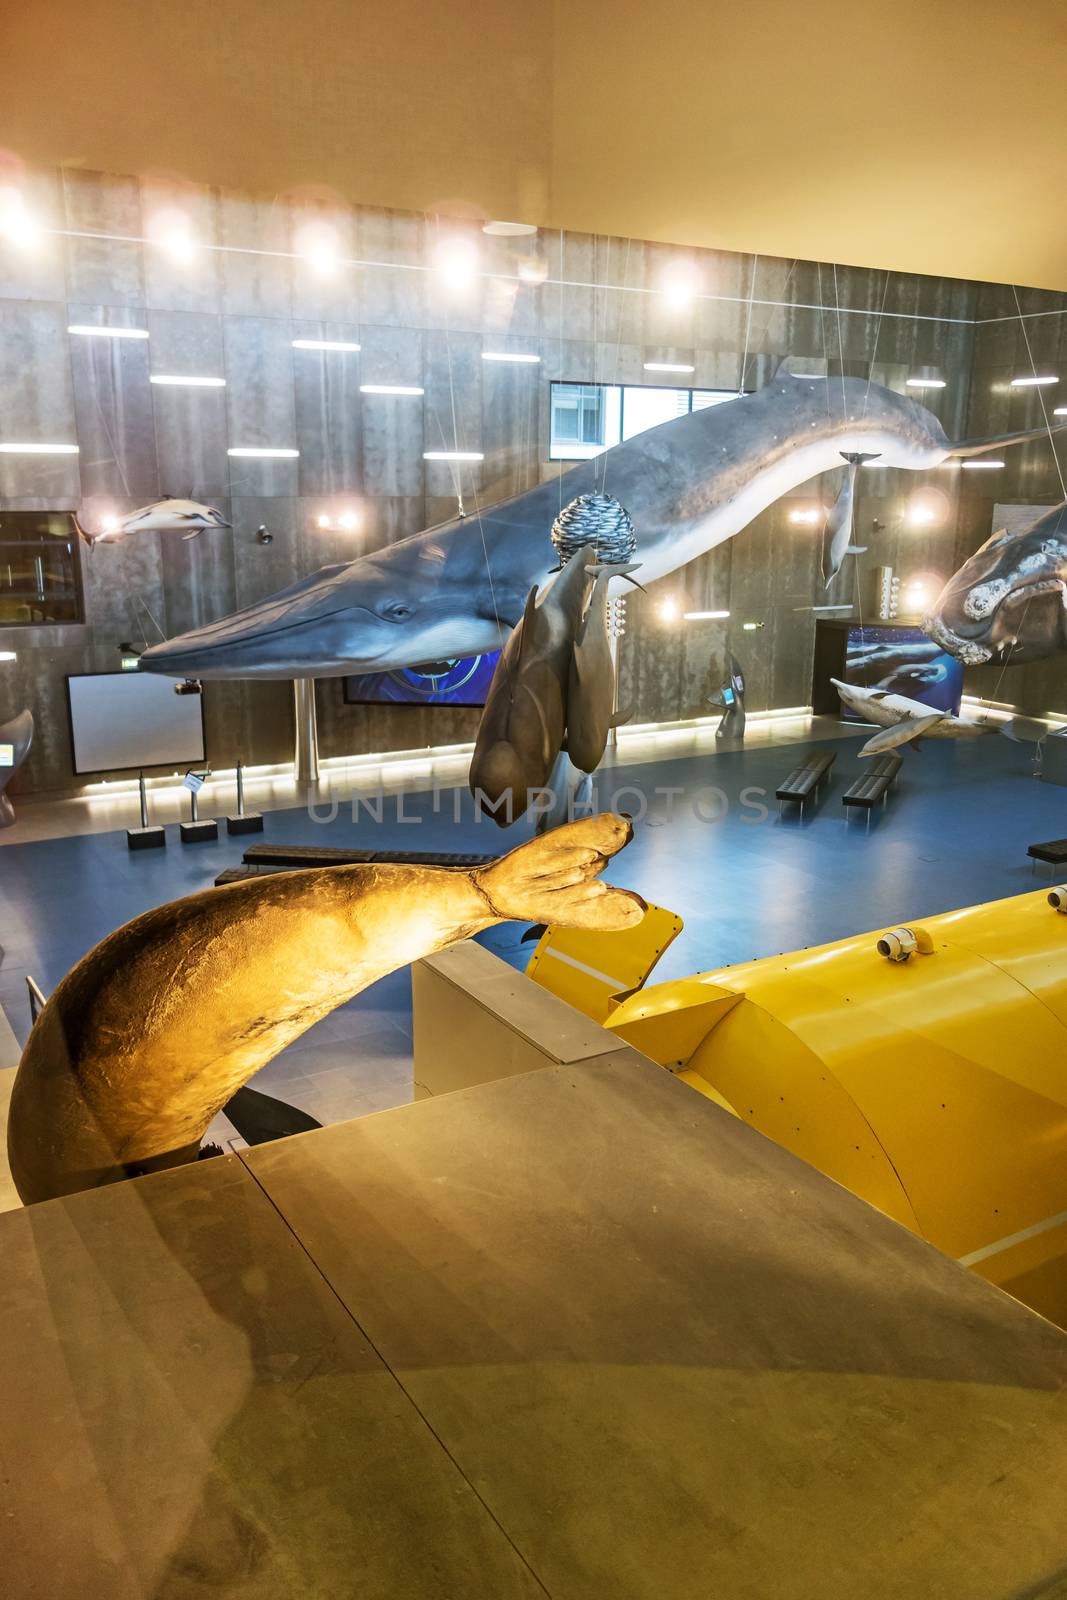 Canical, Portugal - June 5, 2013: Museu da Baleia (Whale Museum). It documents the history of whale hunting on Madeira.